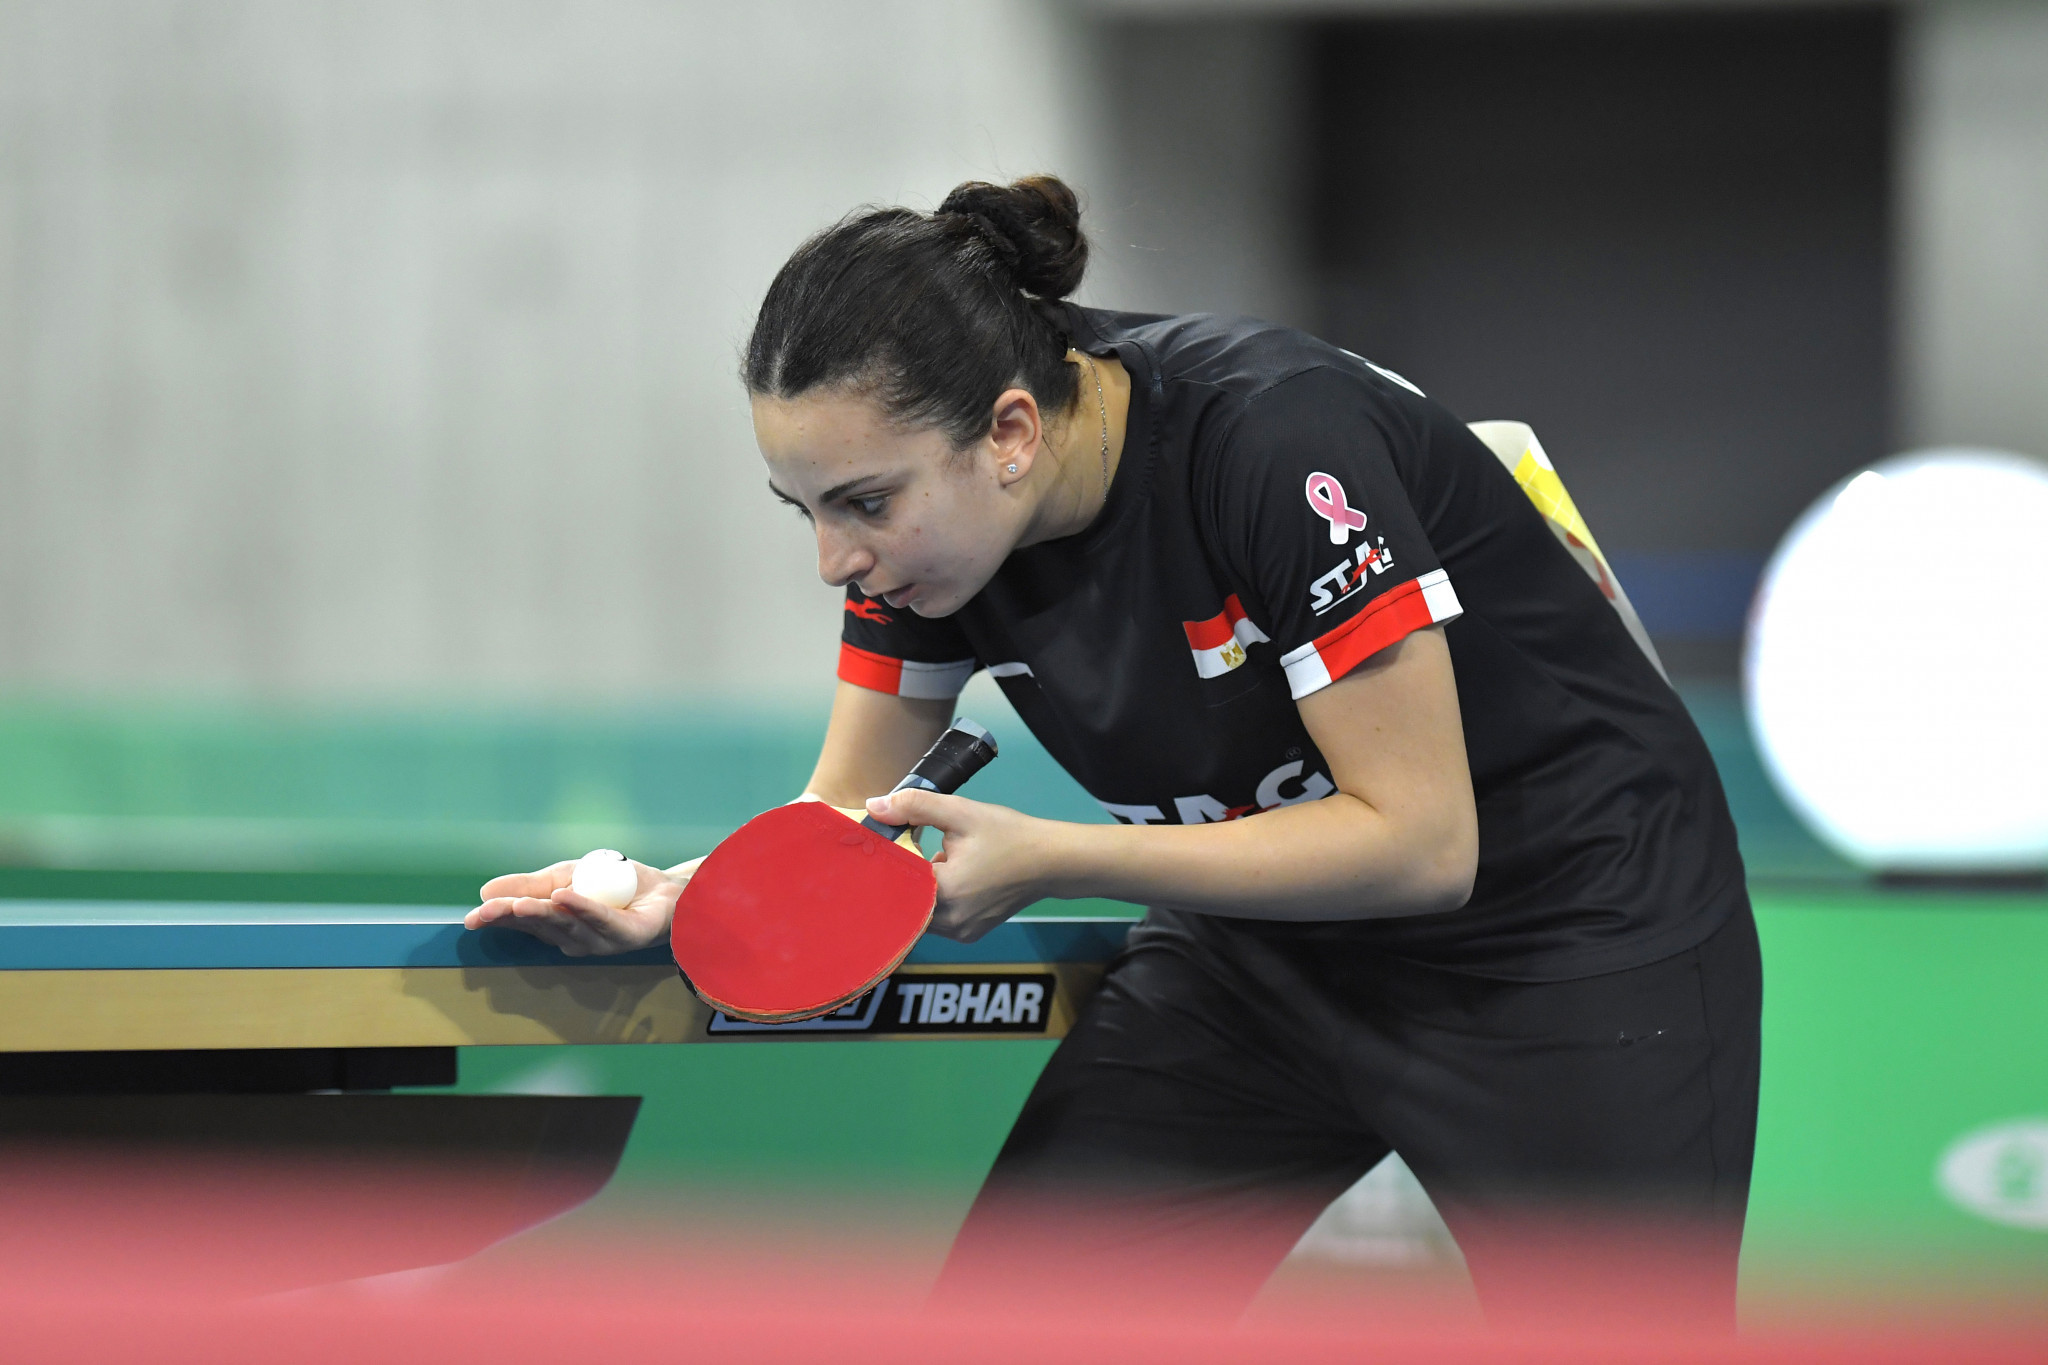 Egypt's Assar and Meshref do not drop a game in qualifying for Tokyo 2020 mixed doubles table tennis